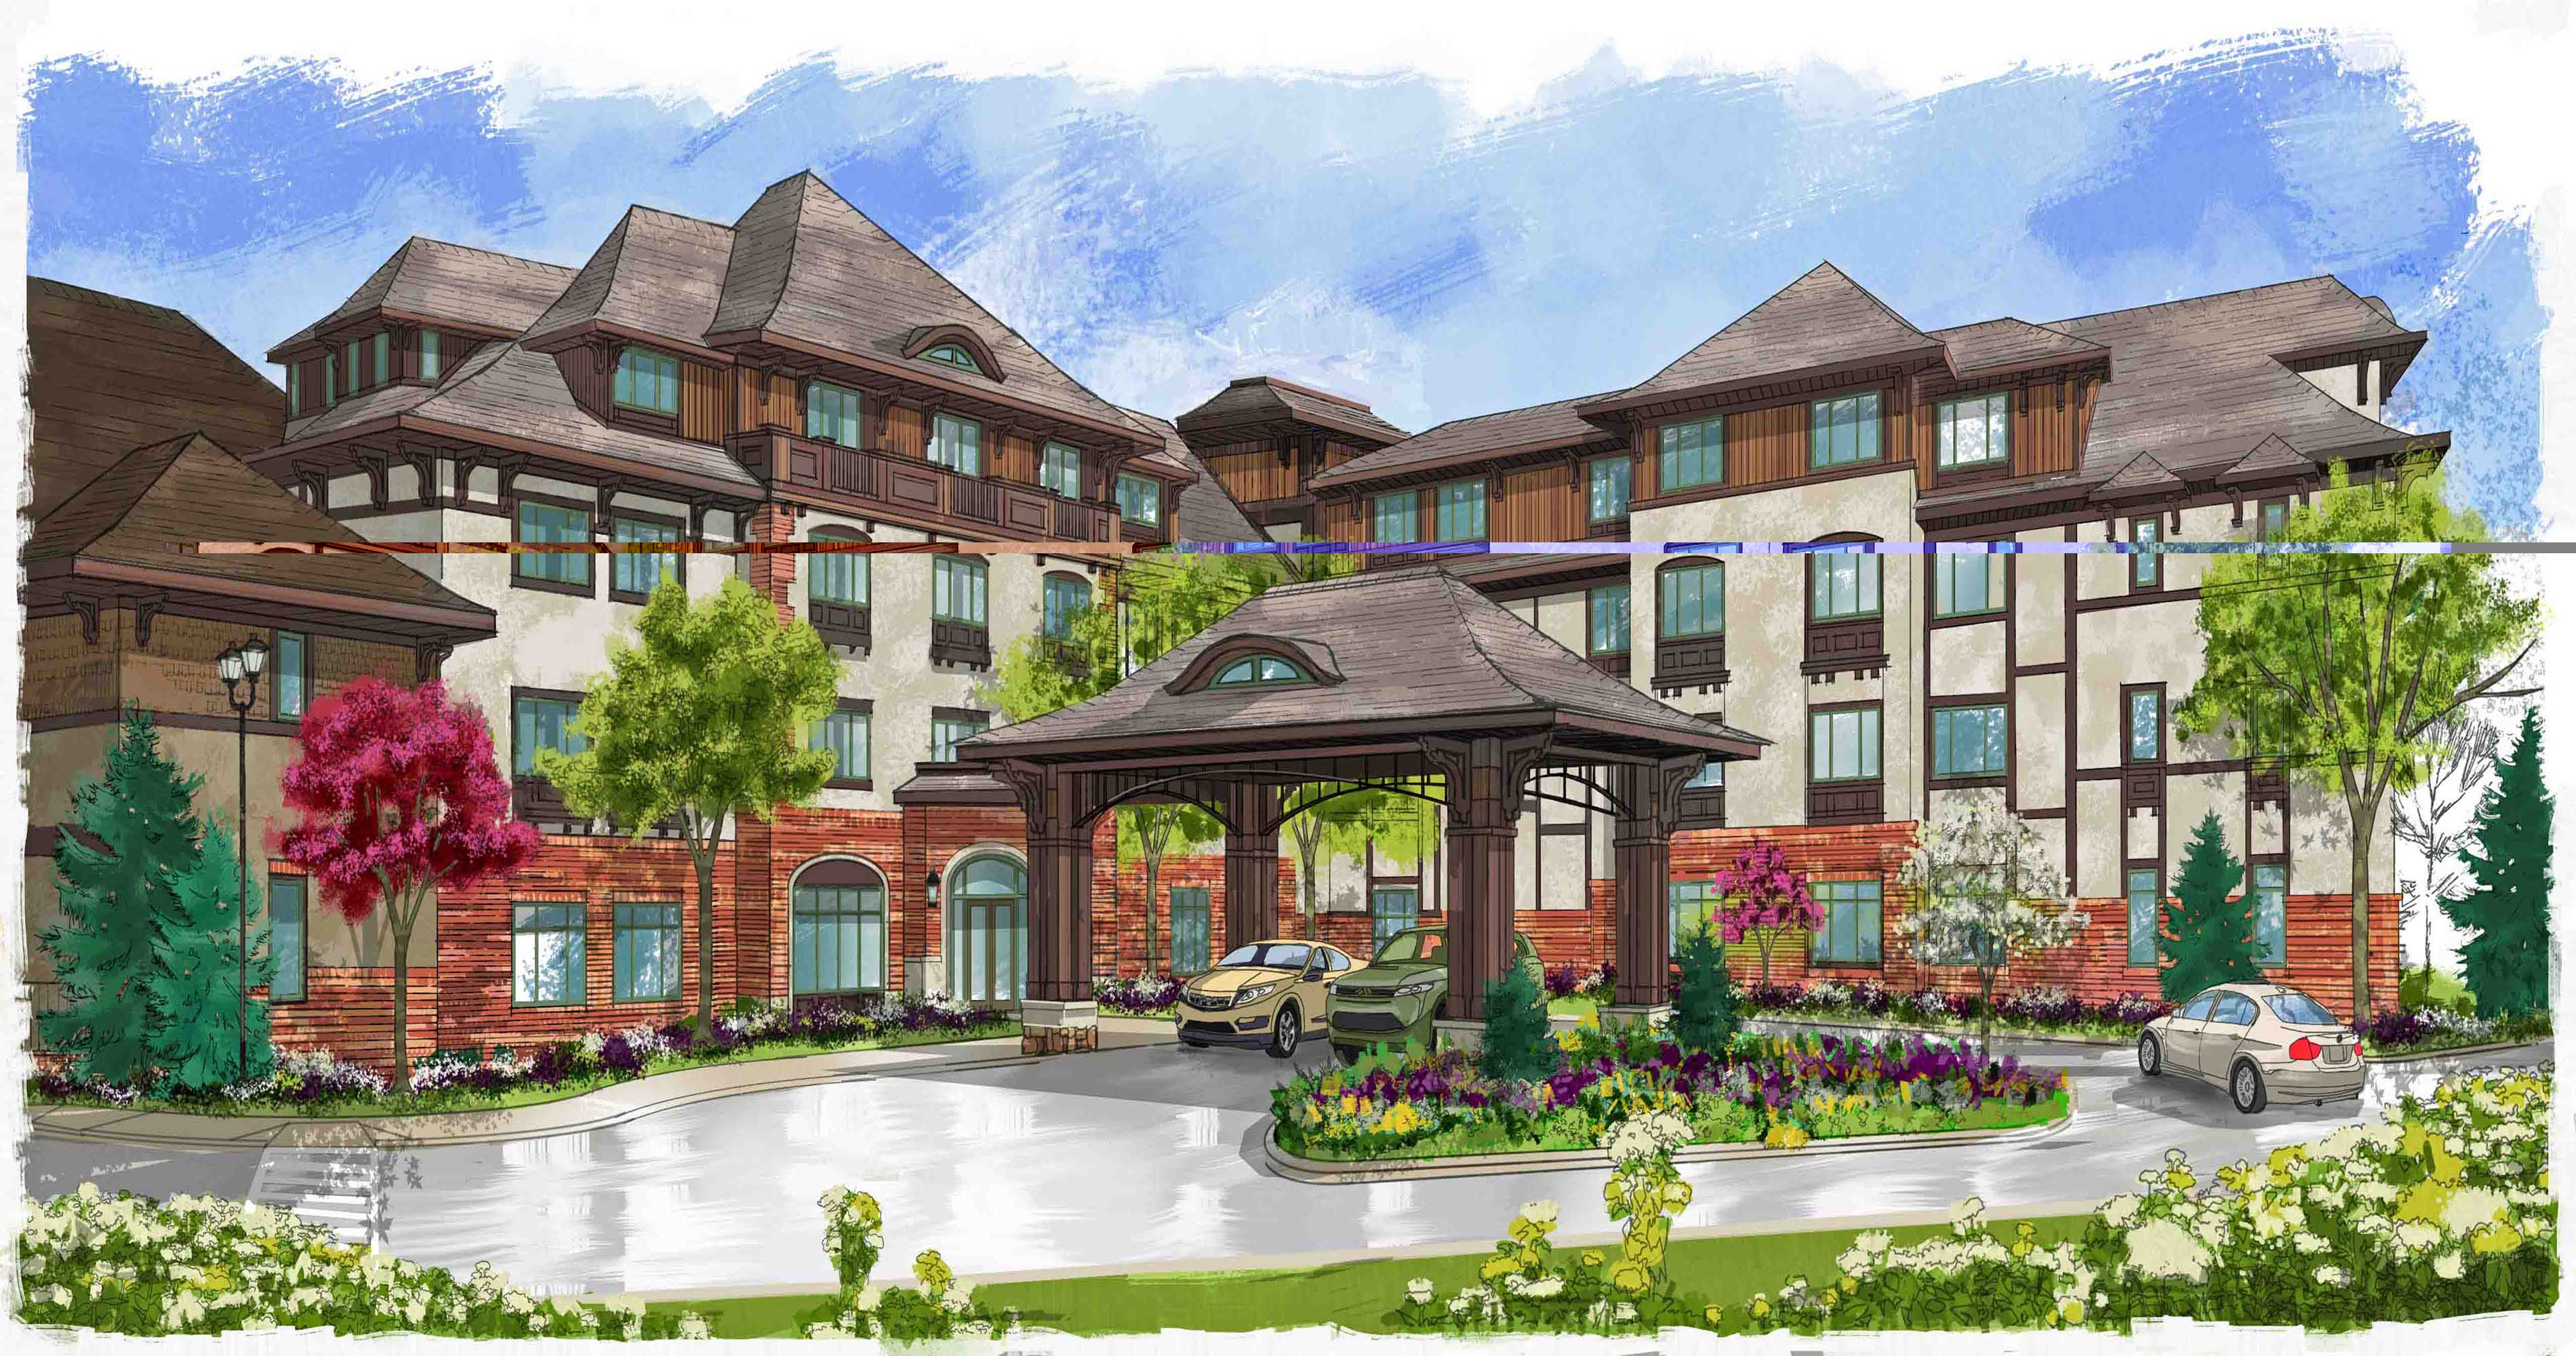 Village Hotel on Biltmore Estate will begin accepting reservations on